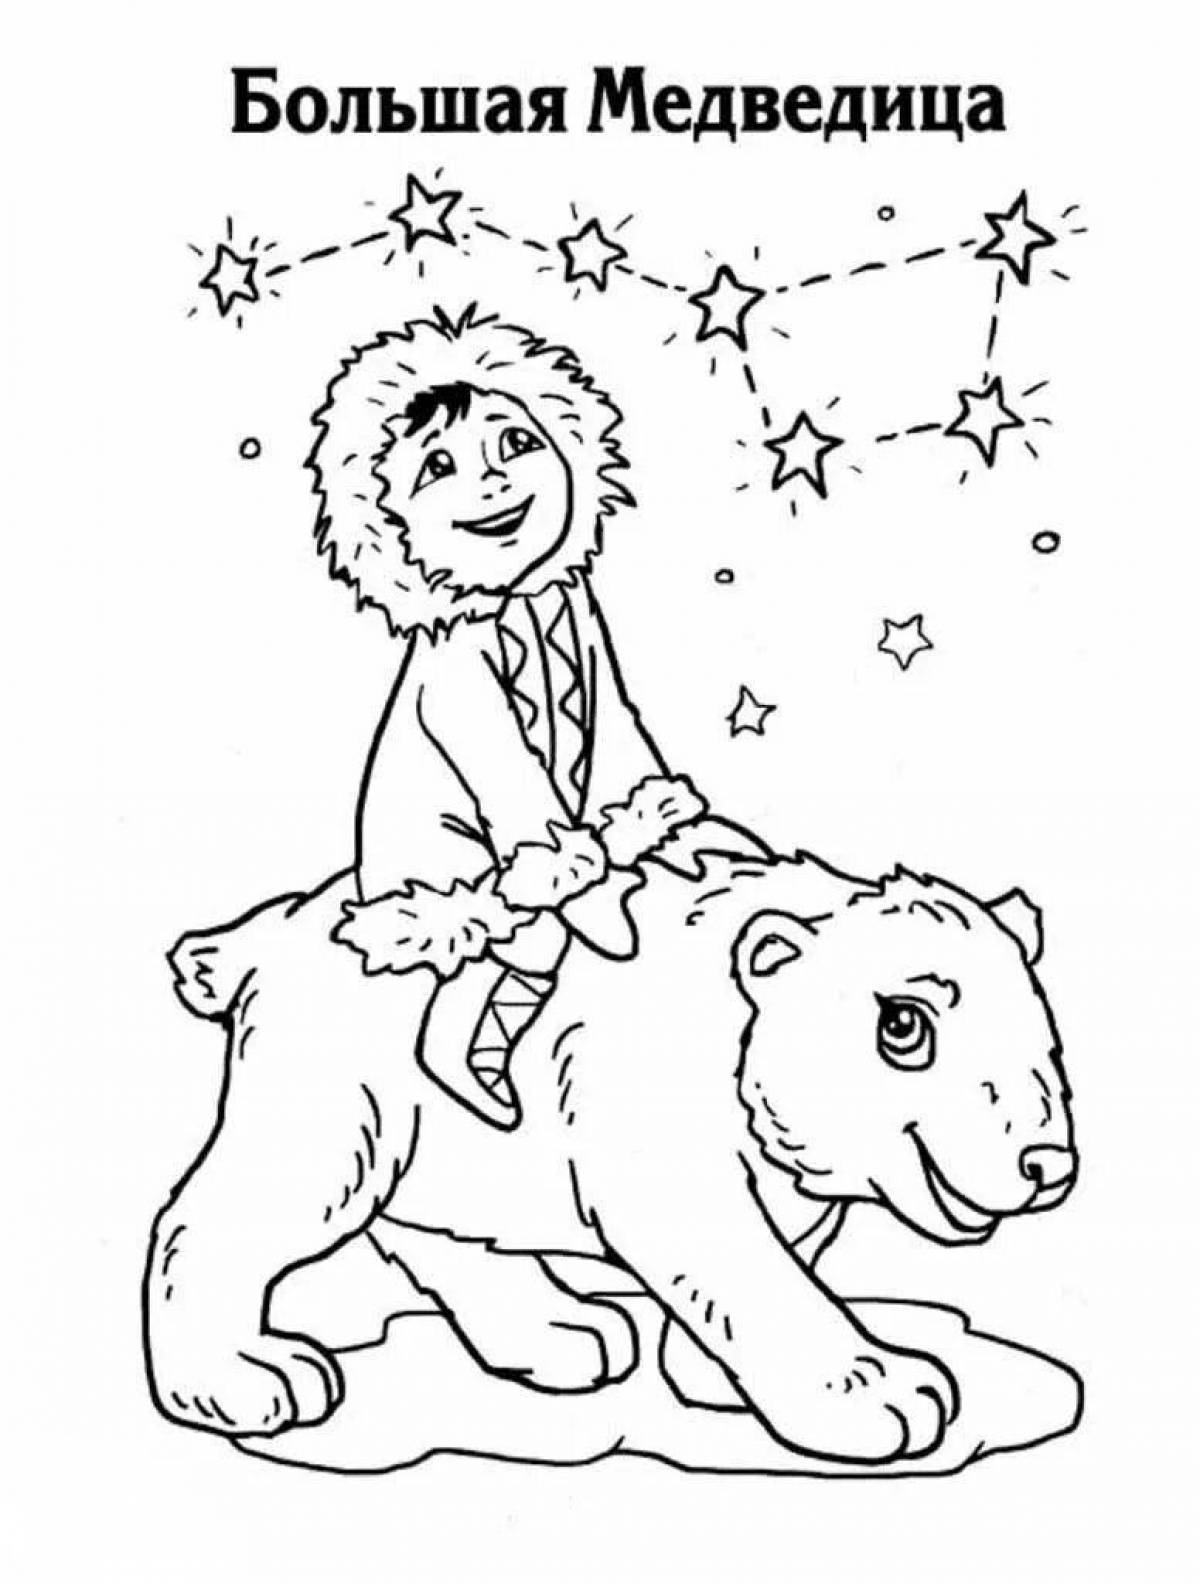 Colorful dipper coloring page